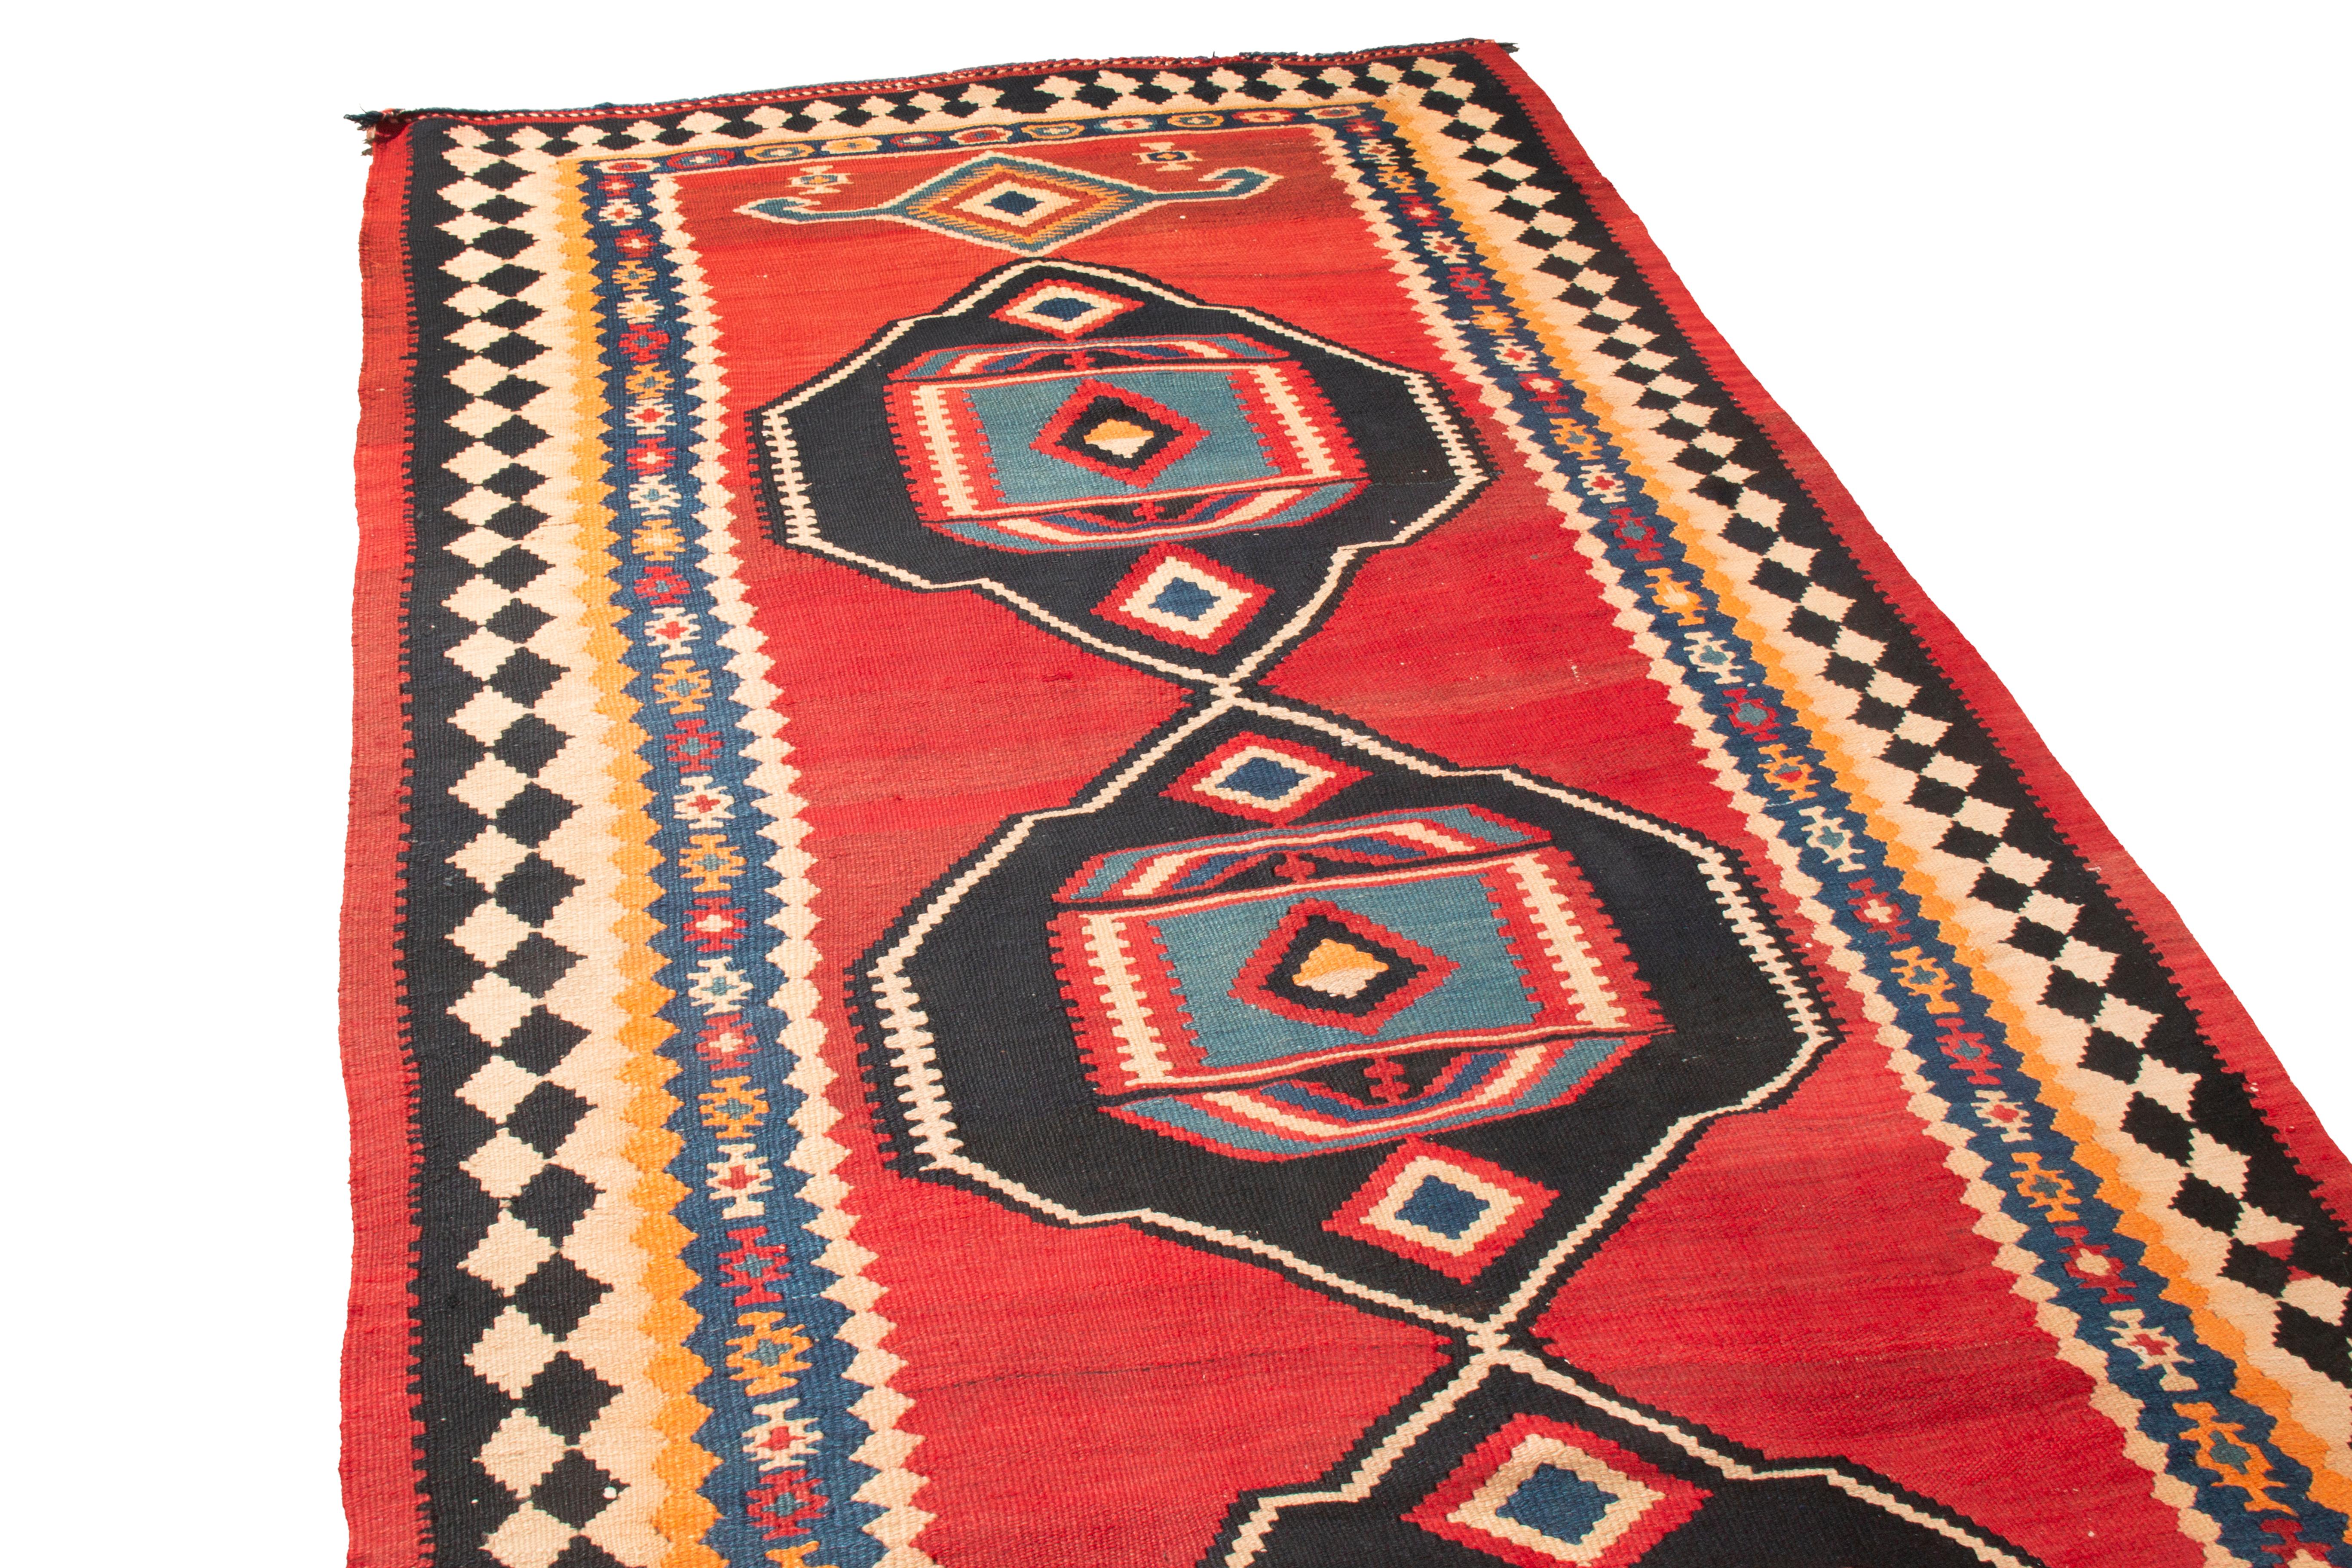 Originating from Persia in 1900, this antique turn of the century Kurdish Kilim rug from Rug & Kilim employs an uncommon combination of several iconic Persian symbols. While the vertical field design. flat-woven in high quality wool, the four